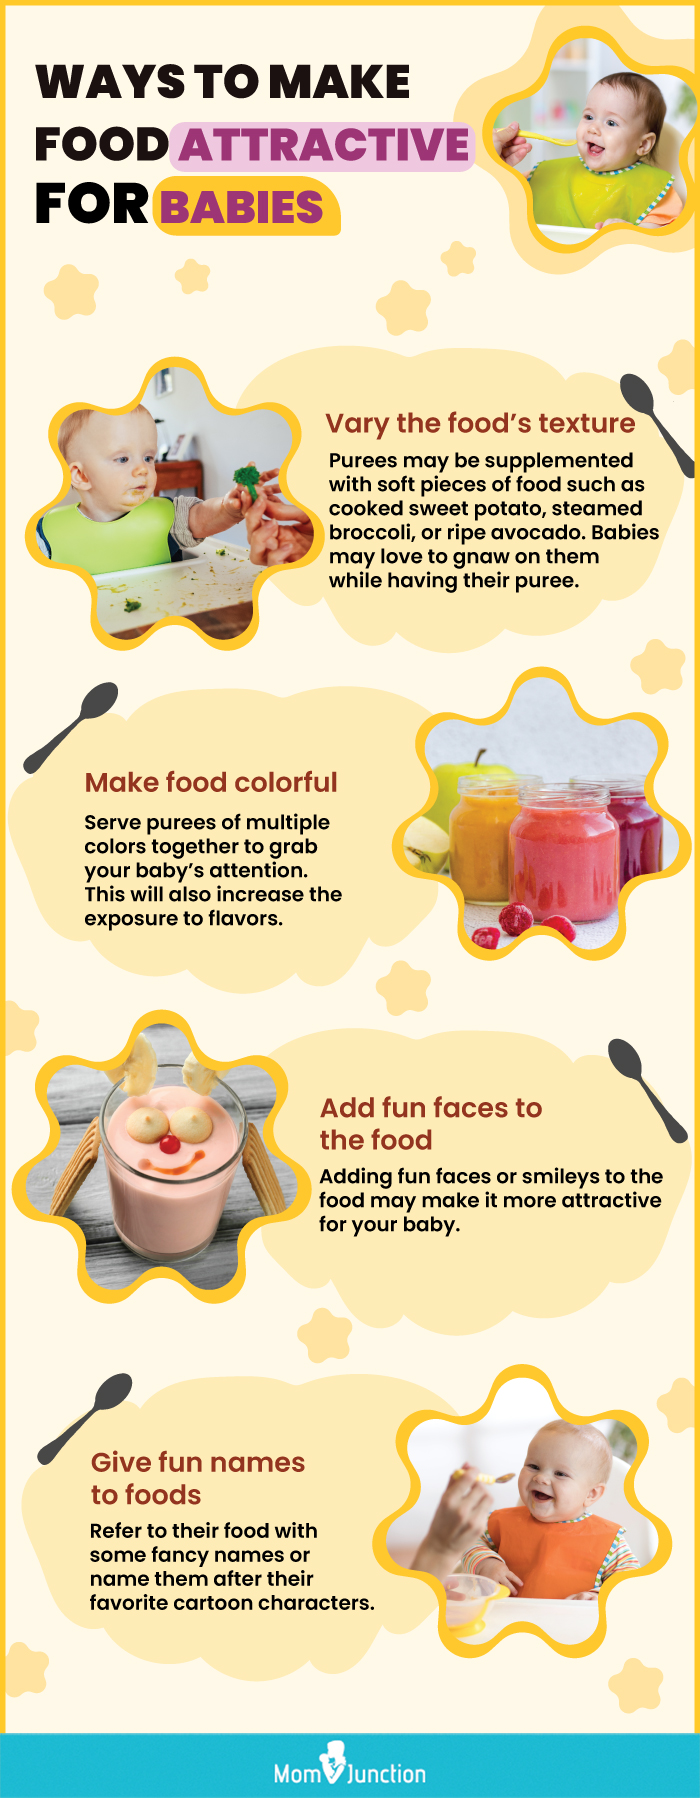 making food appealing for babies [infographic]